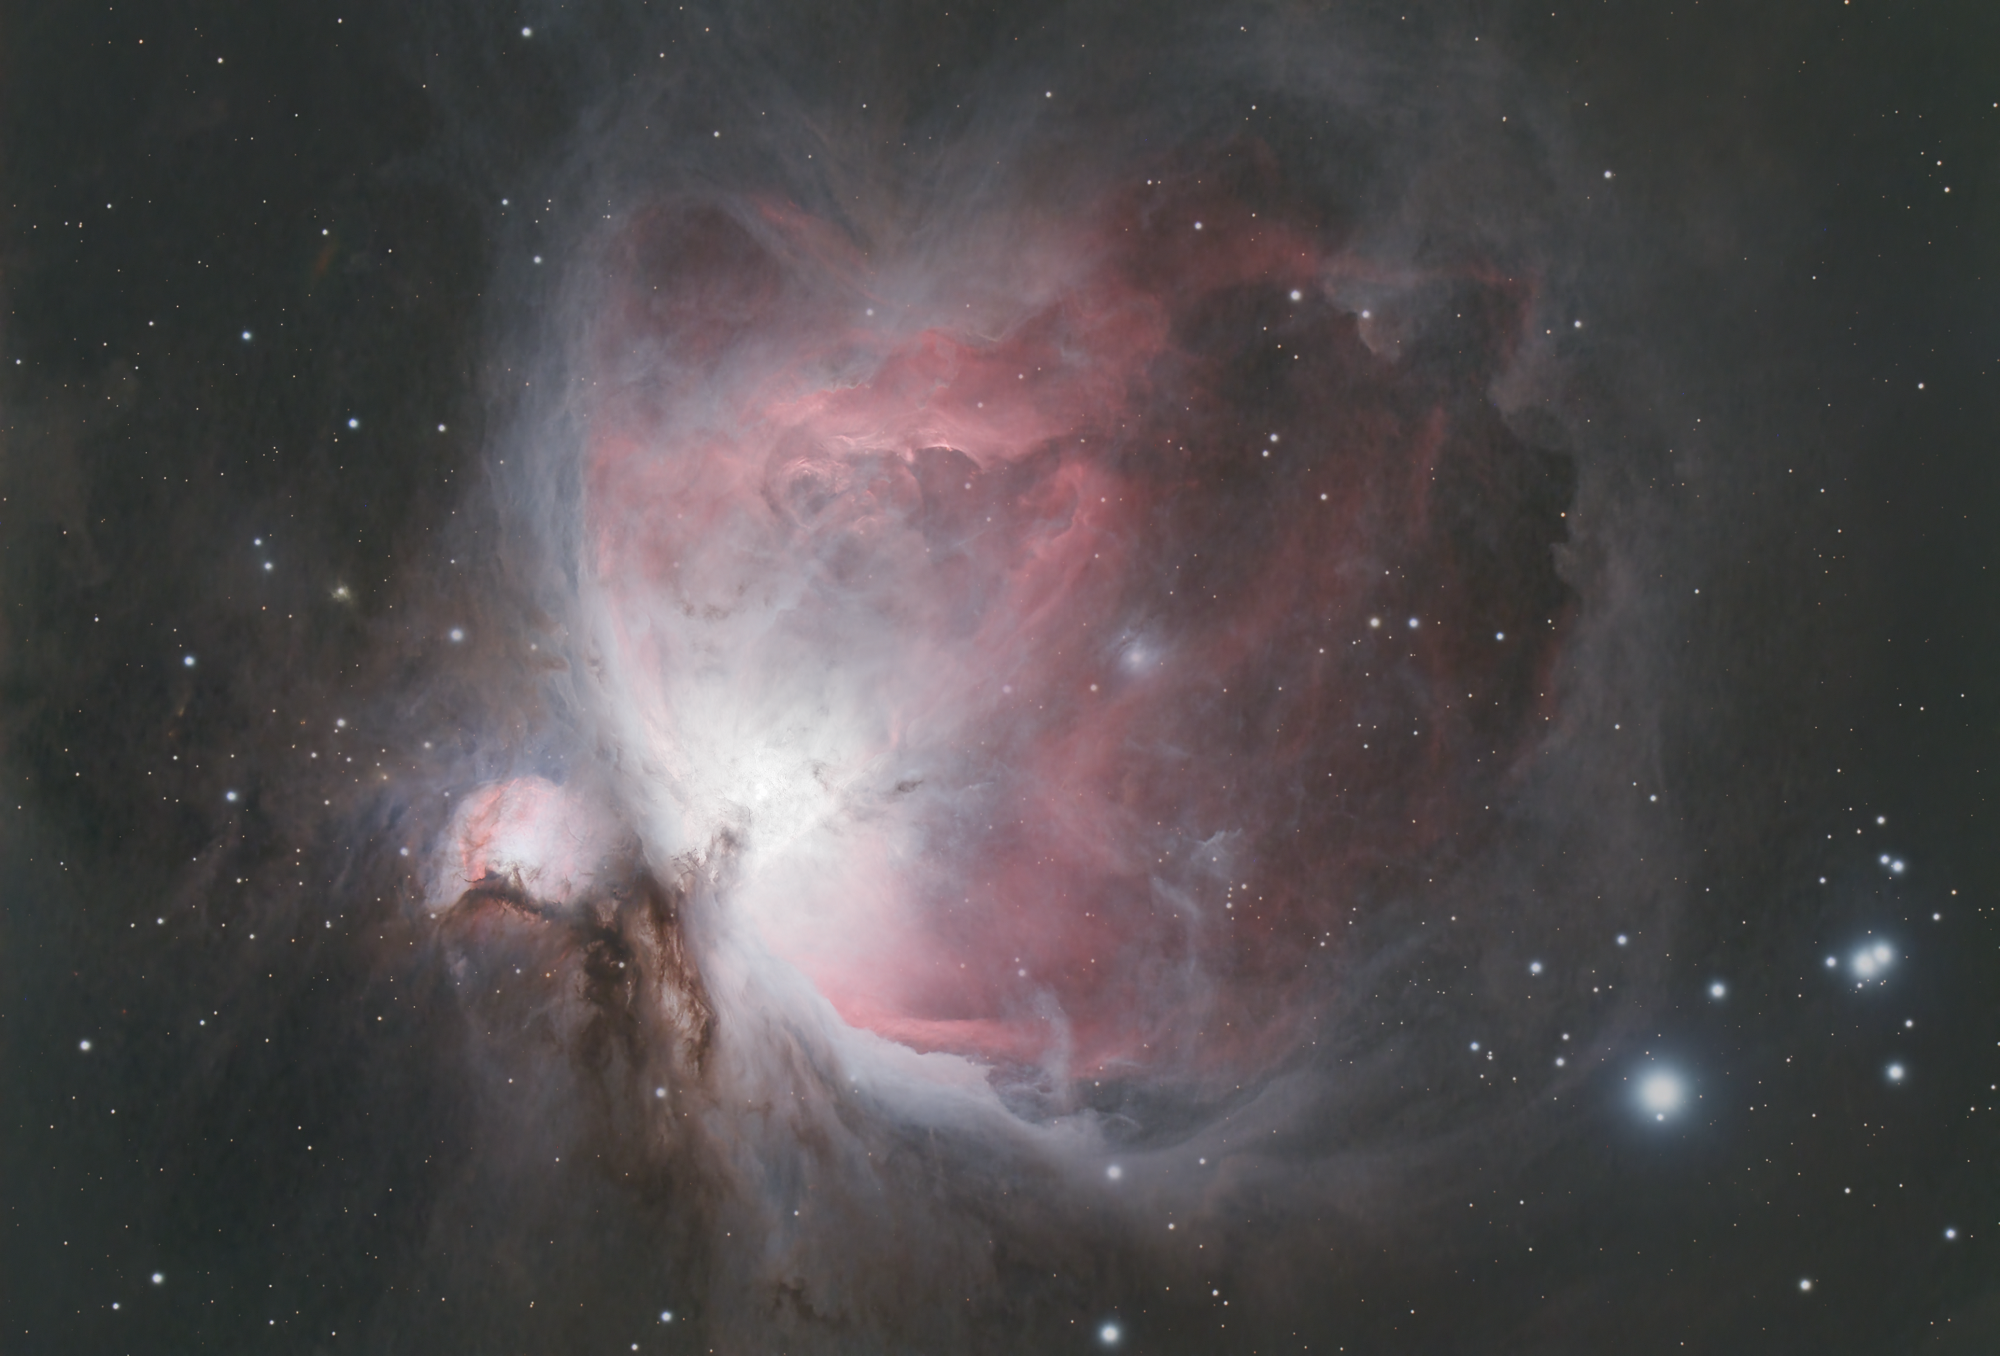 M42_stack_ABE_colorcal_noiseX_blurX_delin_color_curve_star_reducstar_noiseX_HDMRTred.png.d1893a2c4feebfbb6e3366efaa6a03c7.png